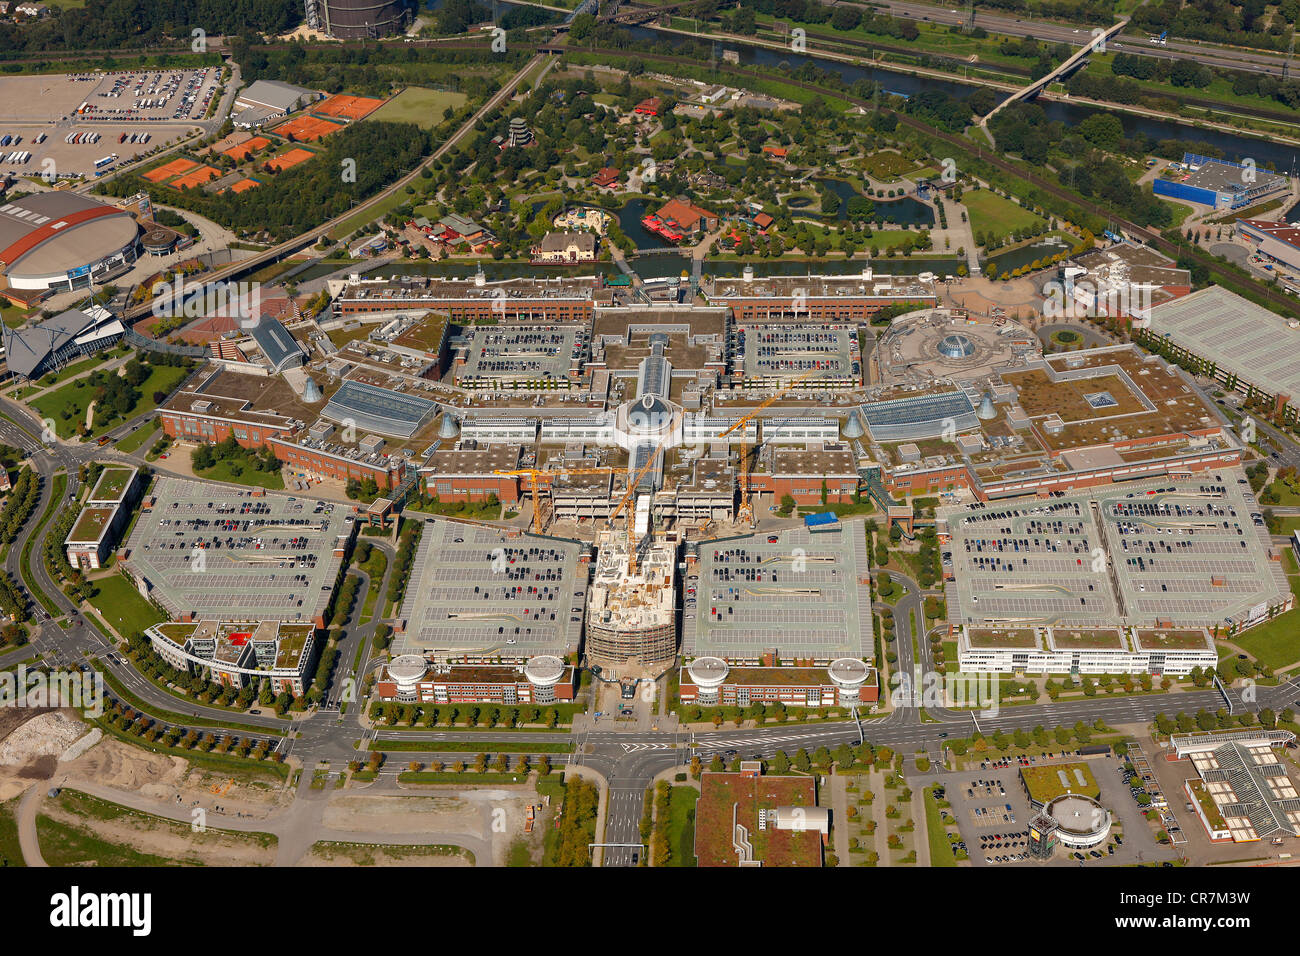 Aerial view, CENTRO shopping mall with annex building, Oberhausen, Ruhr area, North Rhine-Westphalia, Germany, Europe Stock Photo